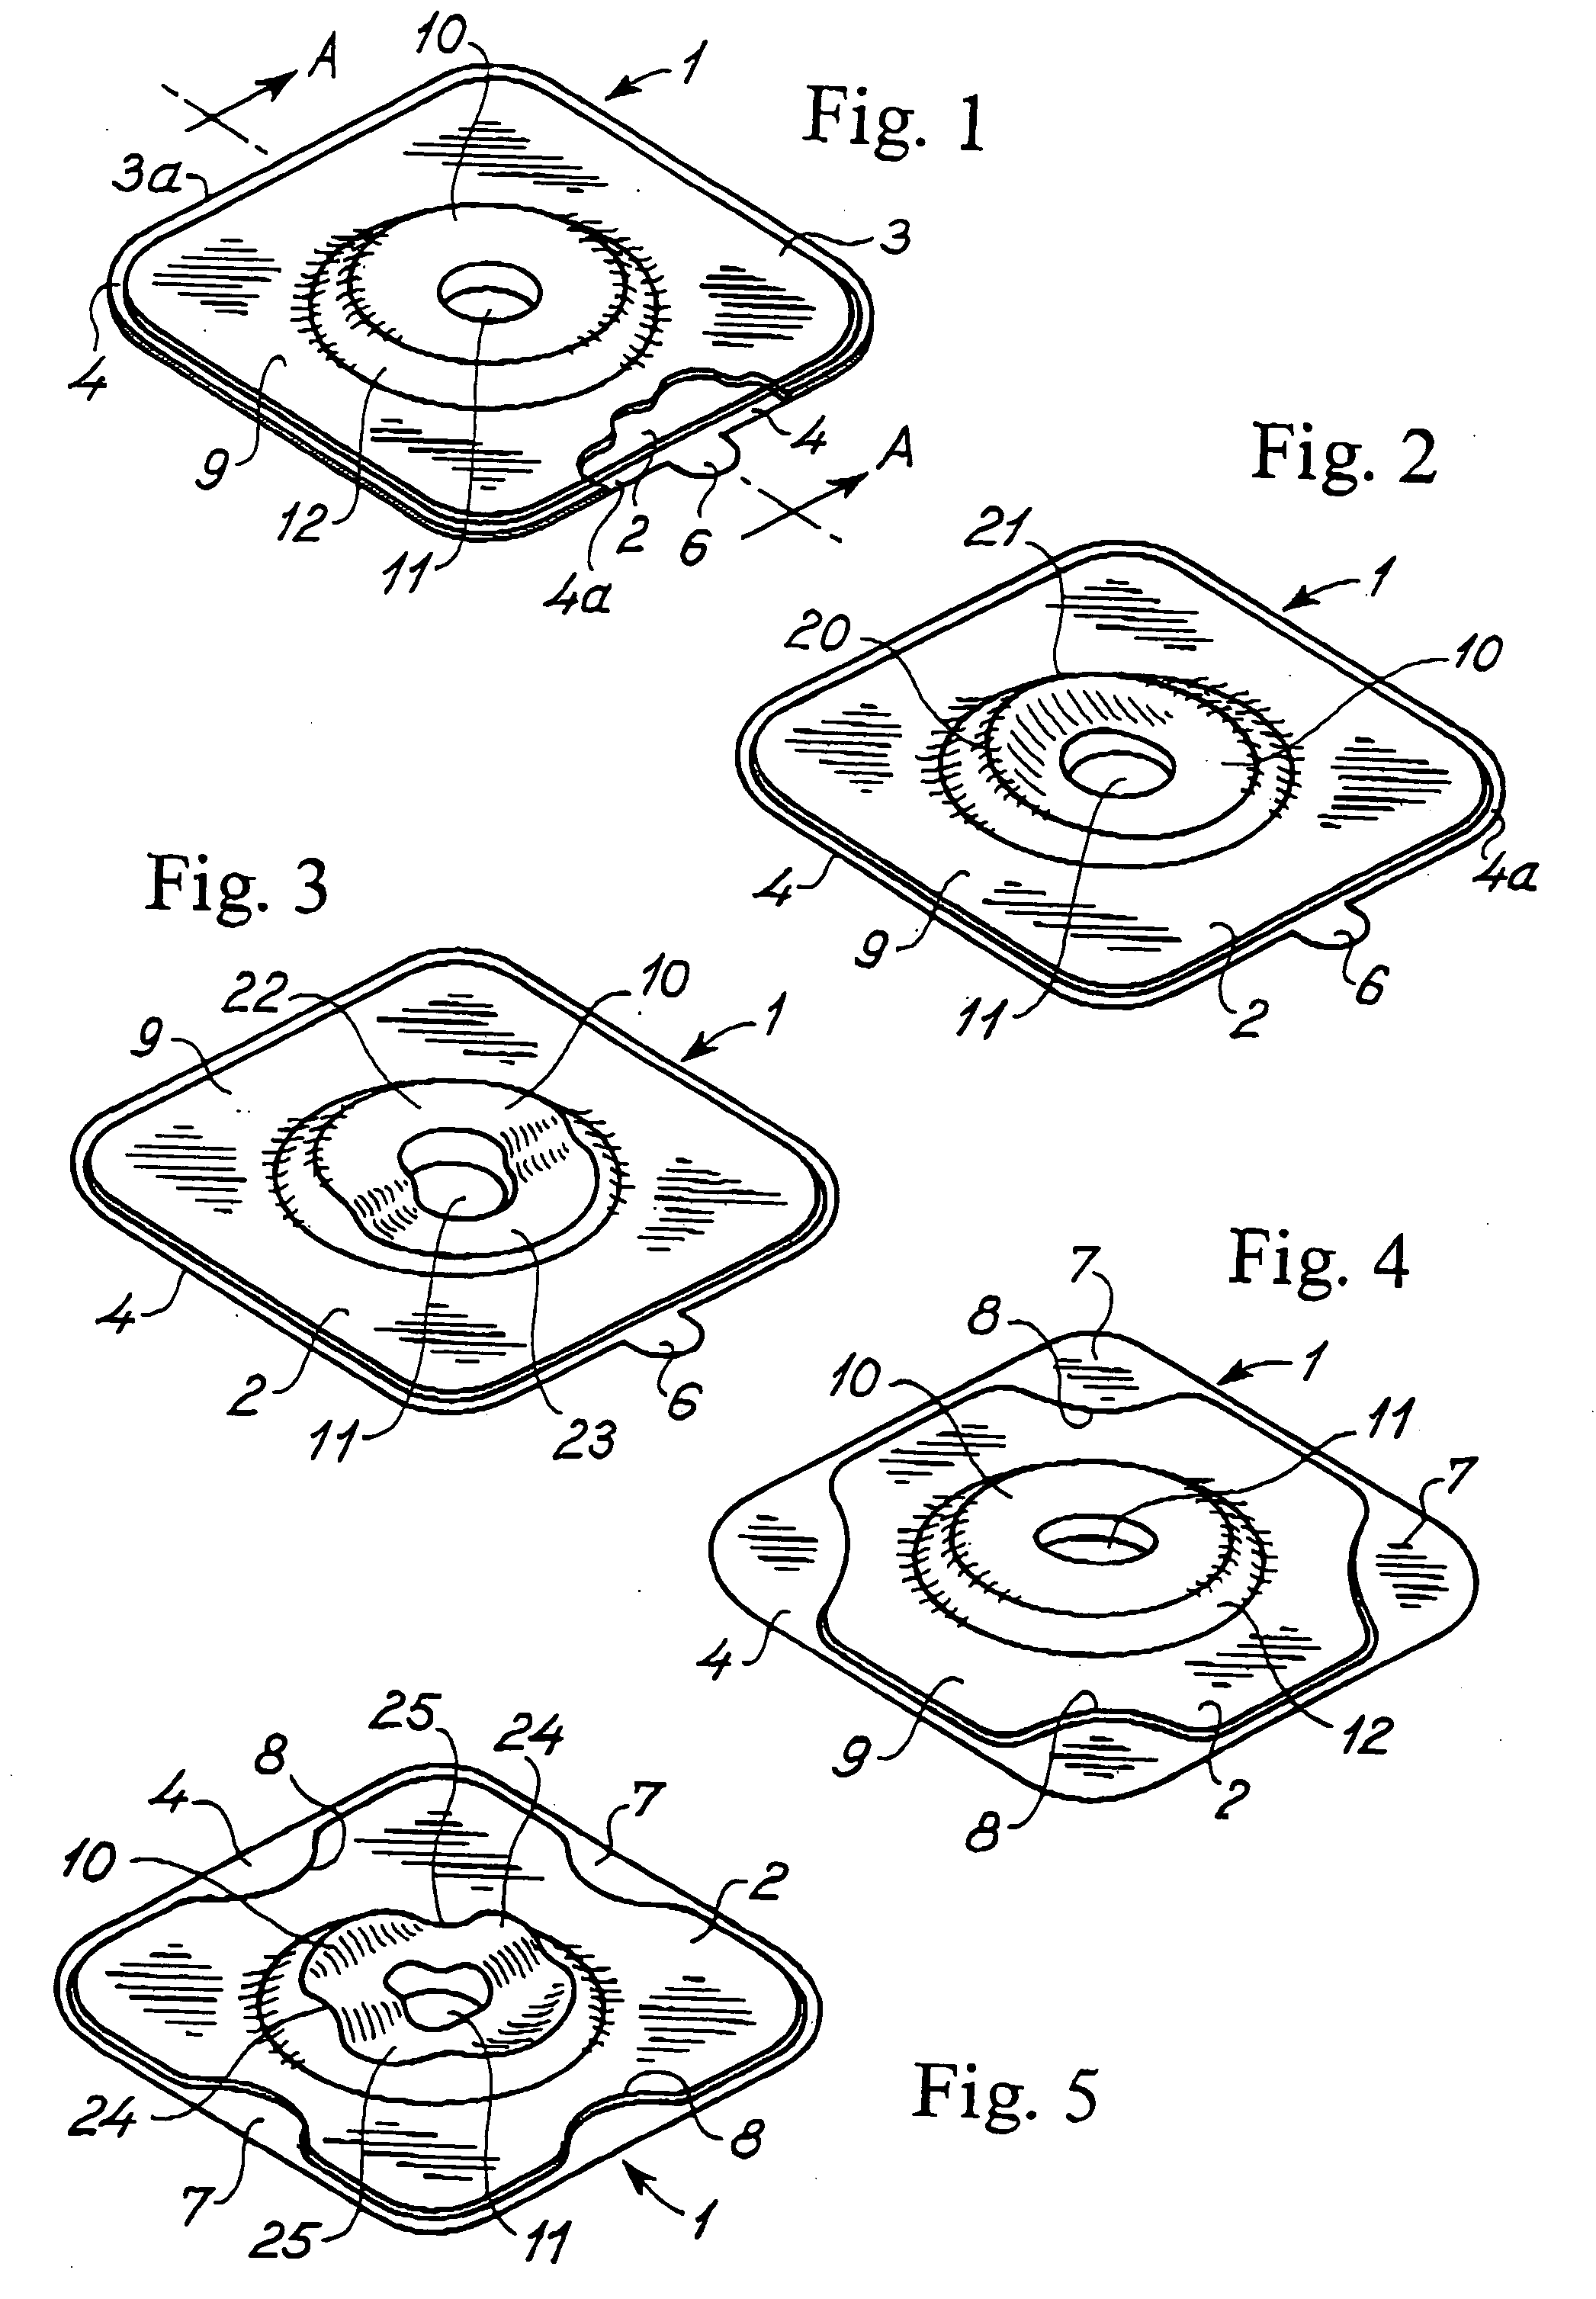 Method of manufacturing soft convex adhesive wafer